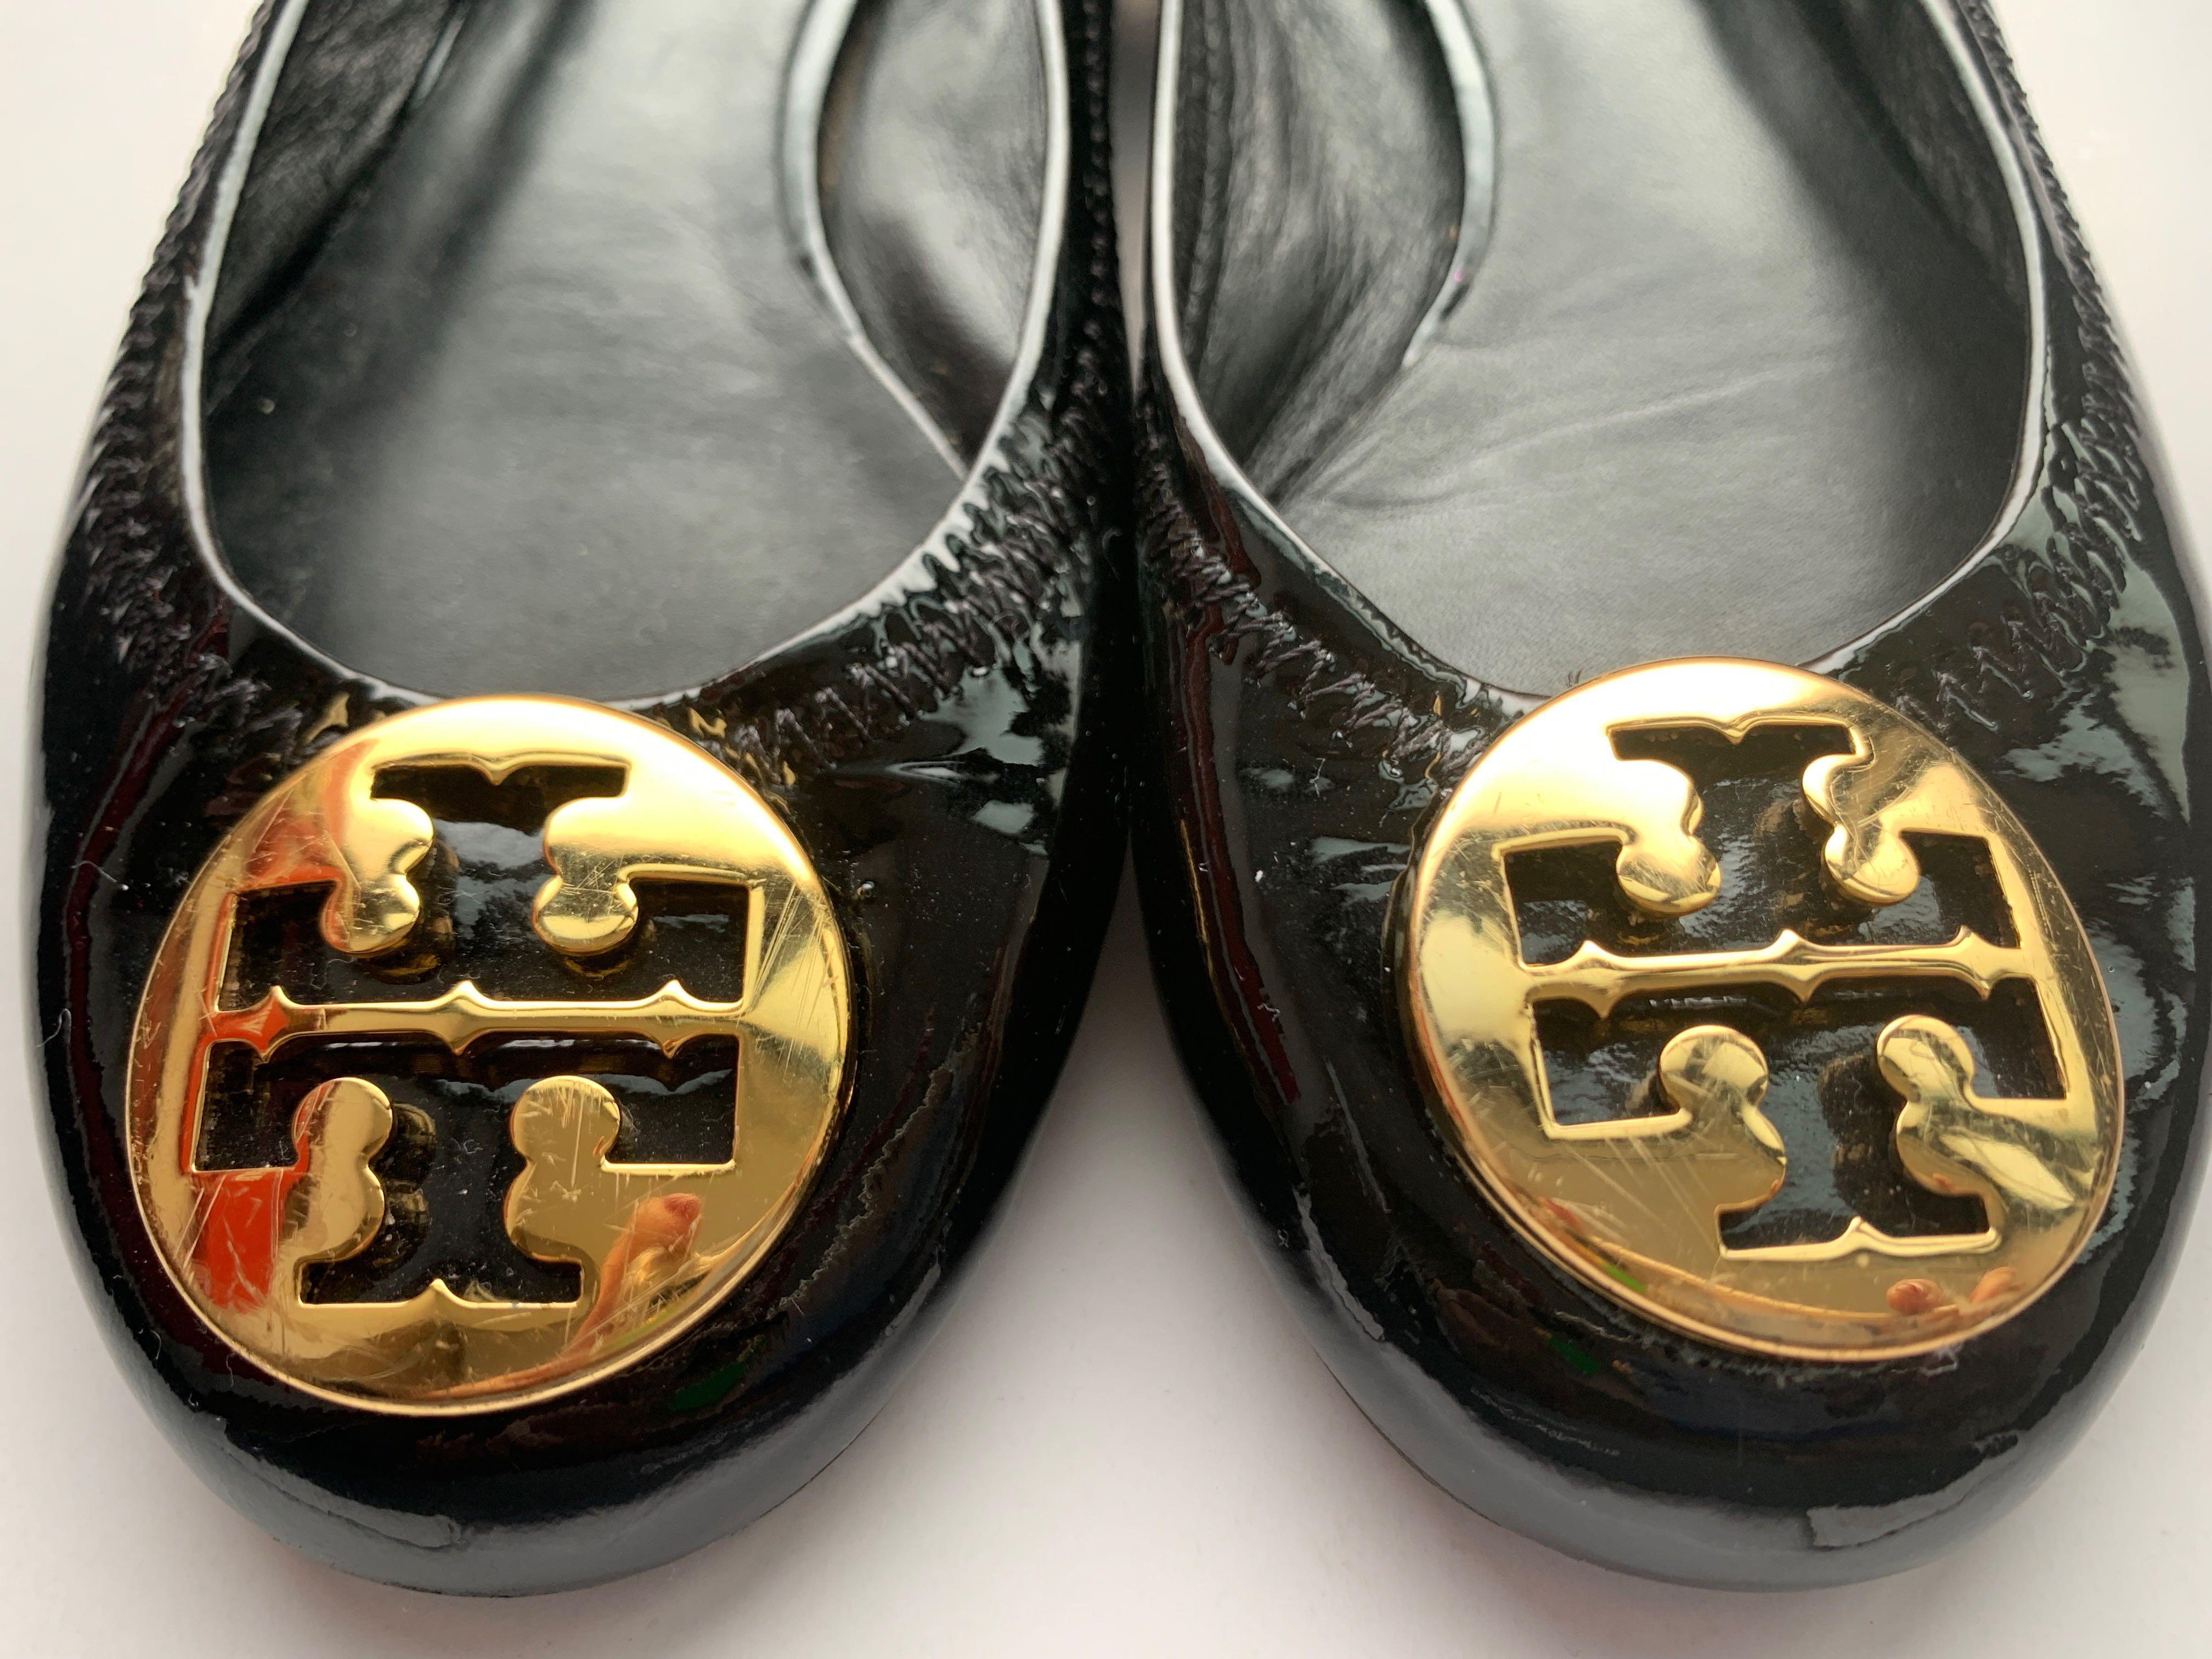 Authentic Tory Burch faux flat ballet style shoes. Size 11C kids girls  almost new! Made in Brazil. Leather on upper & lining., Babies & Kids,  Babies & Kids Fashion on Carousell